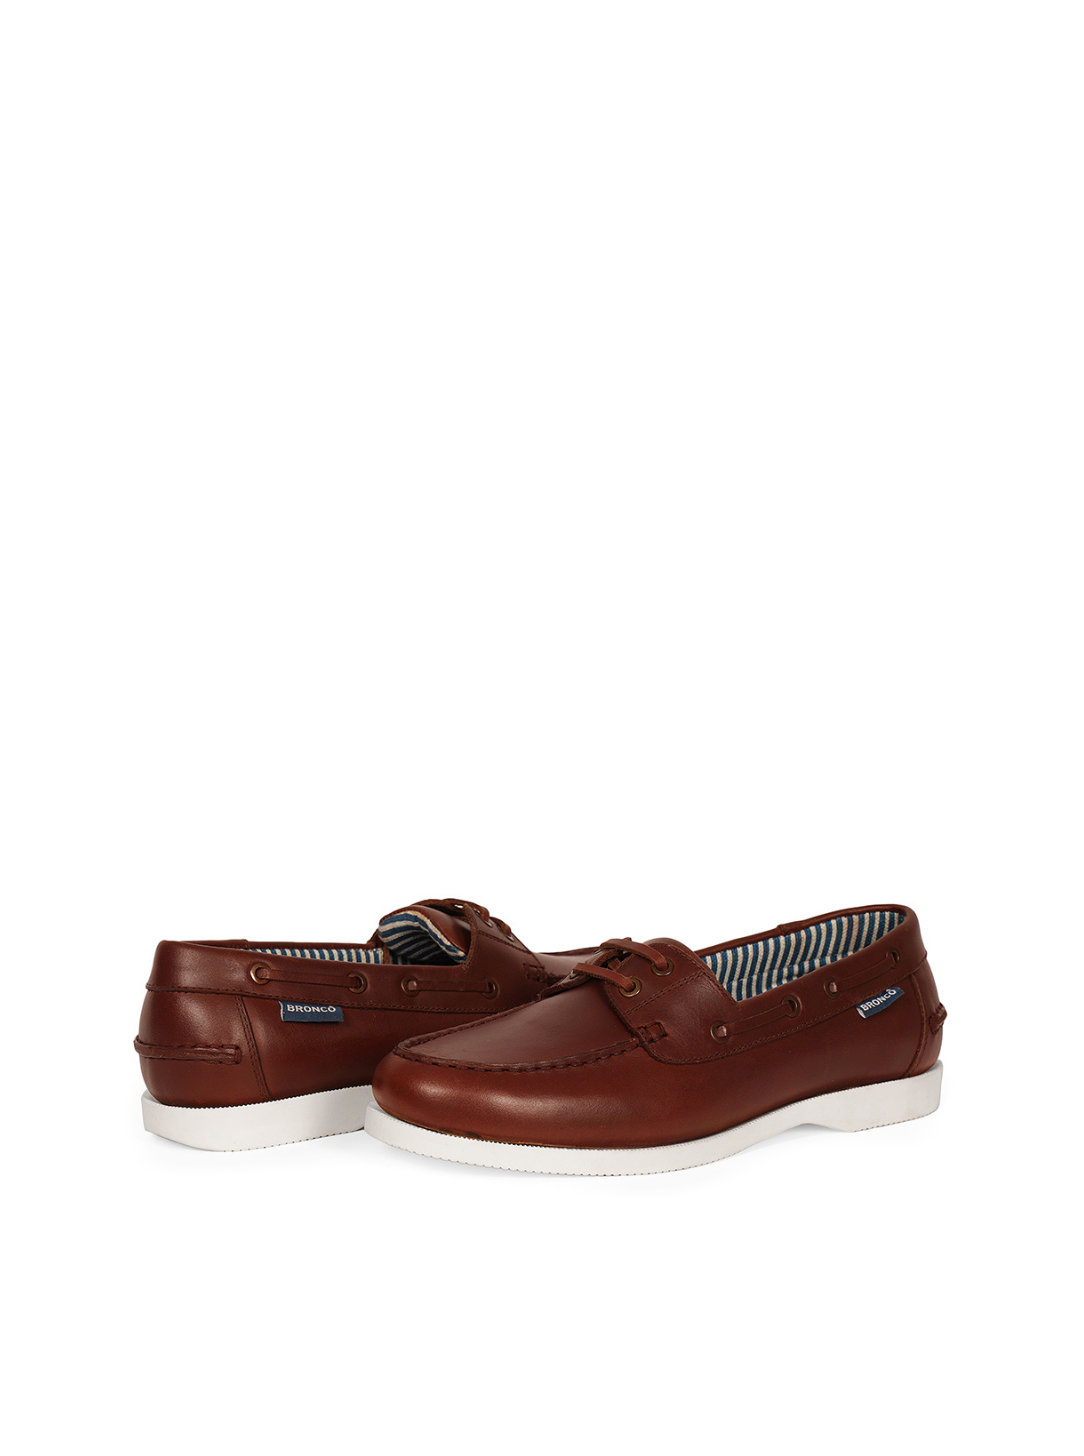 SELLE - Boat shoes, Design & summer collection.